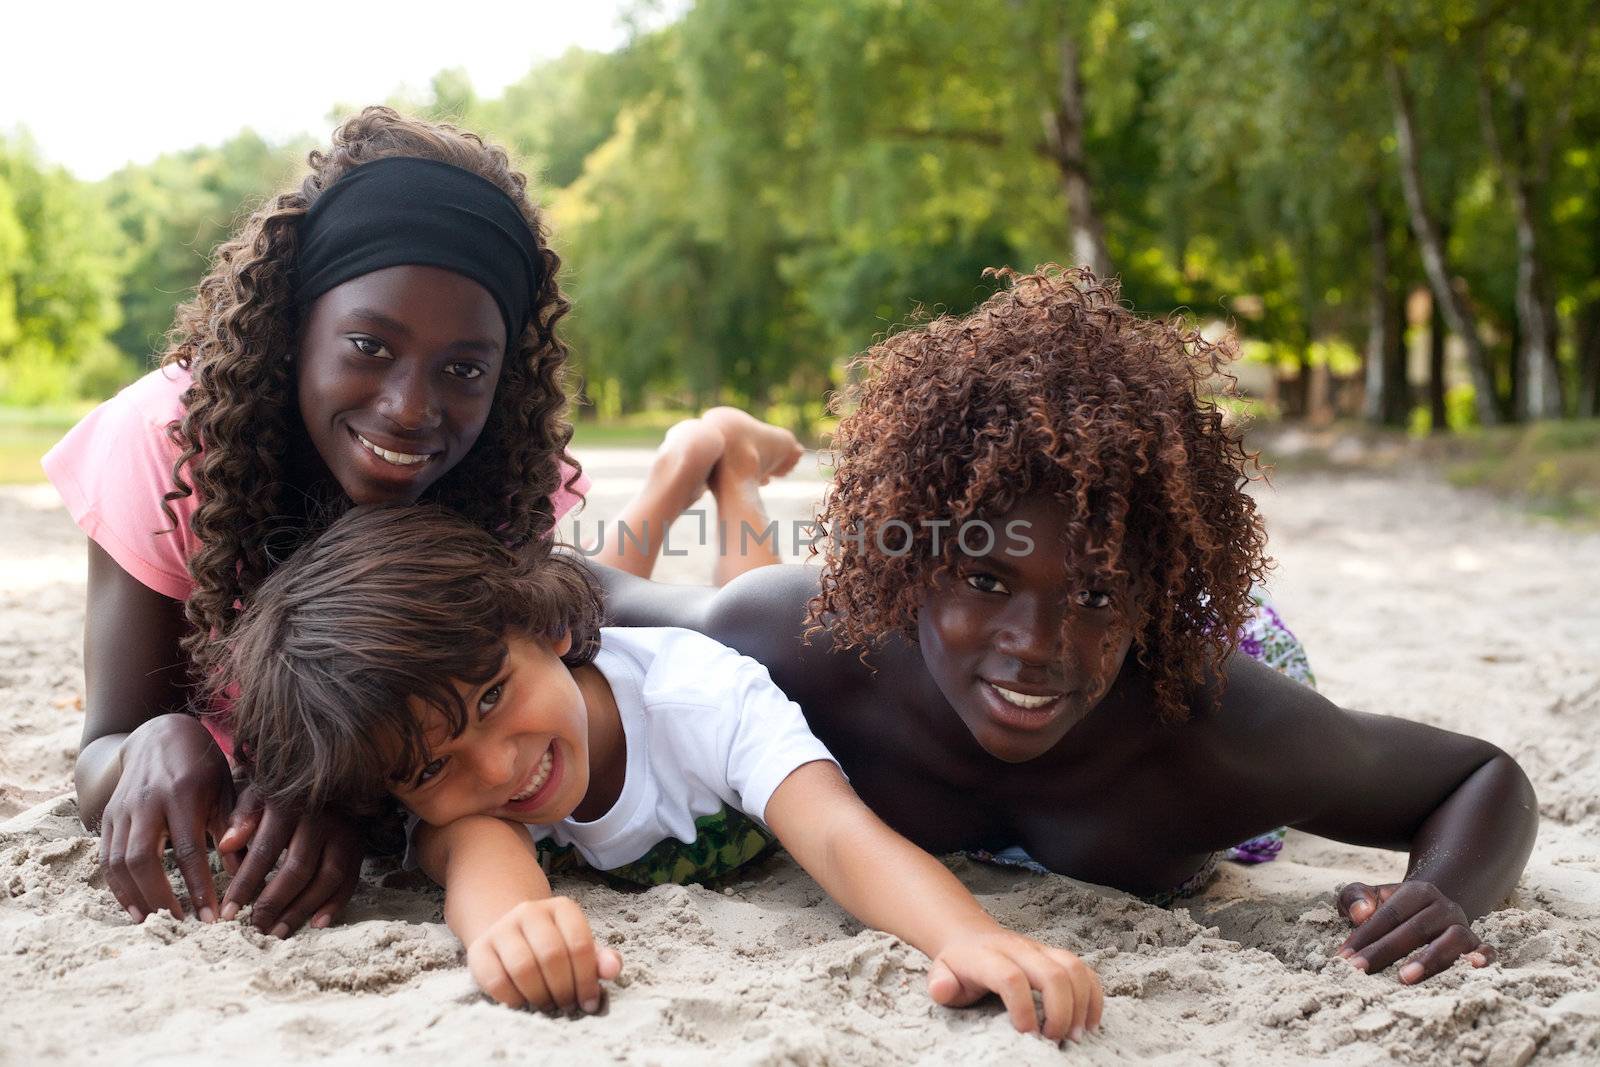 Smiling ethnic children on the beach by DNFStyle